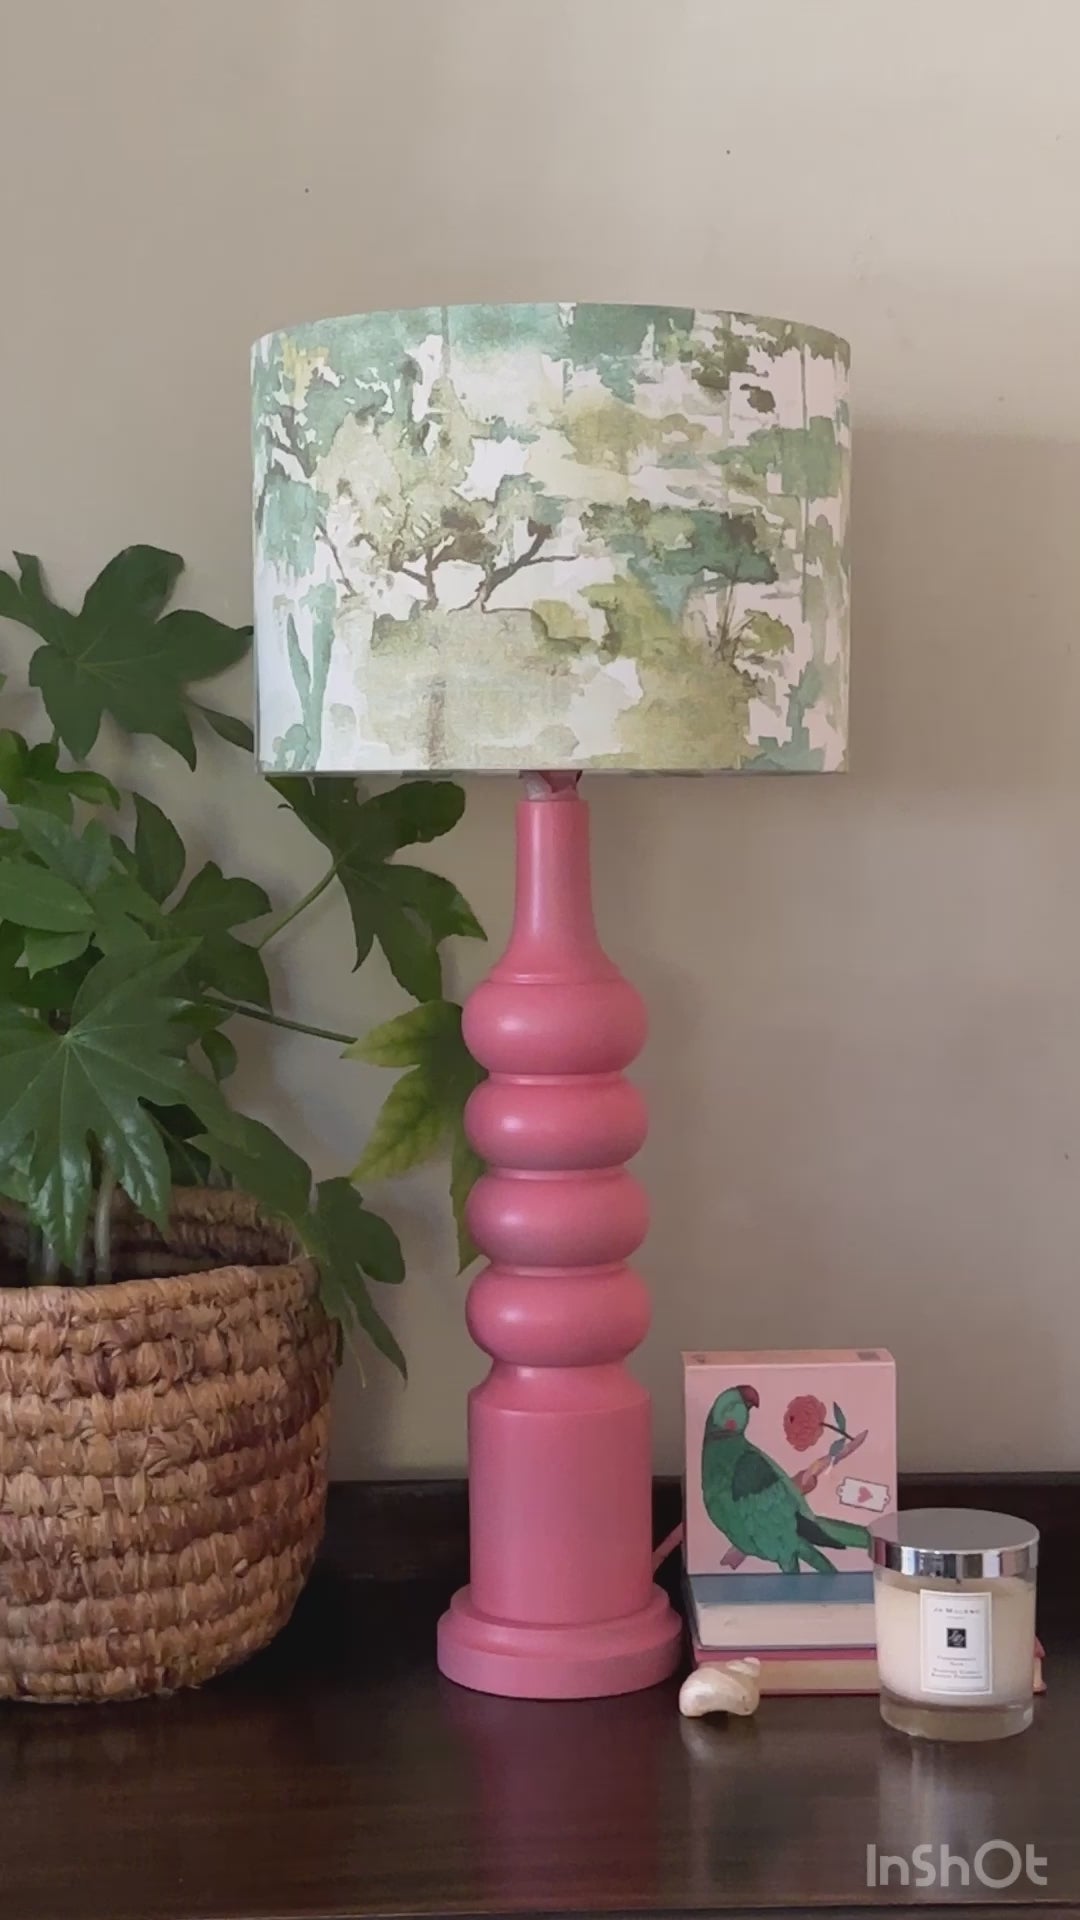 Vintage, Wooden Tall Coral Colour Table Lamp,With Shade, Bobbin Lamp Base, Bright, Colourful, Bedside Lamp, Upcycled Lighting, Maximalist Home Decor